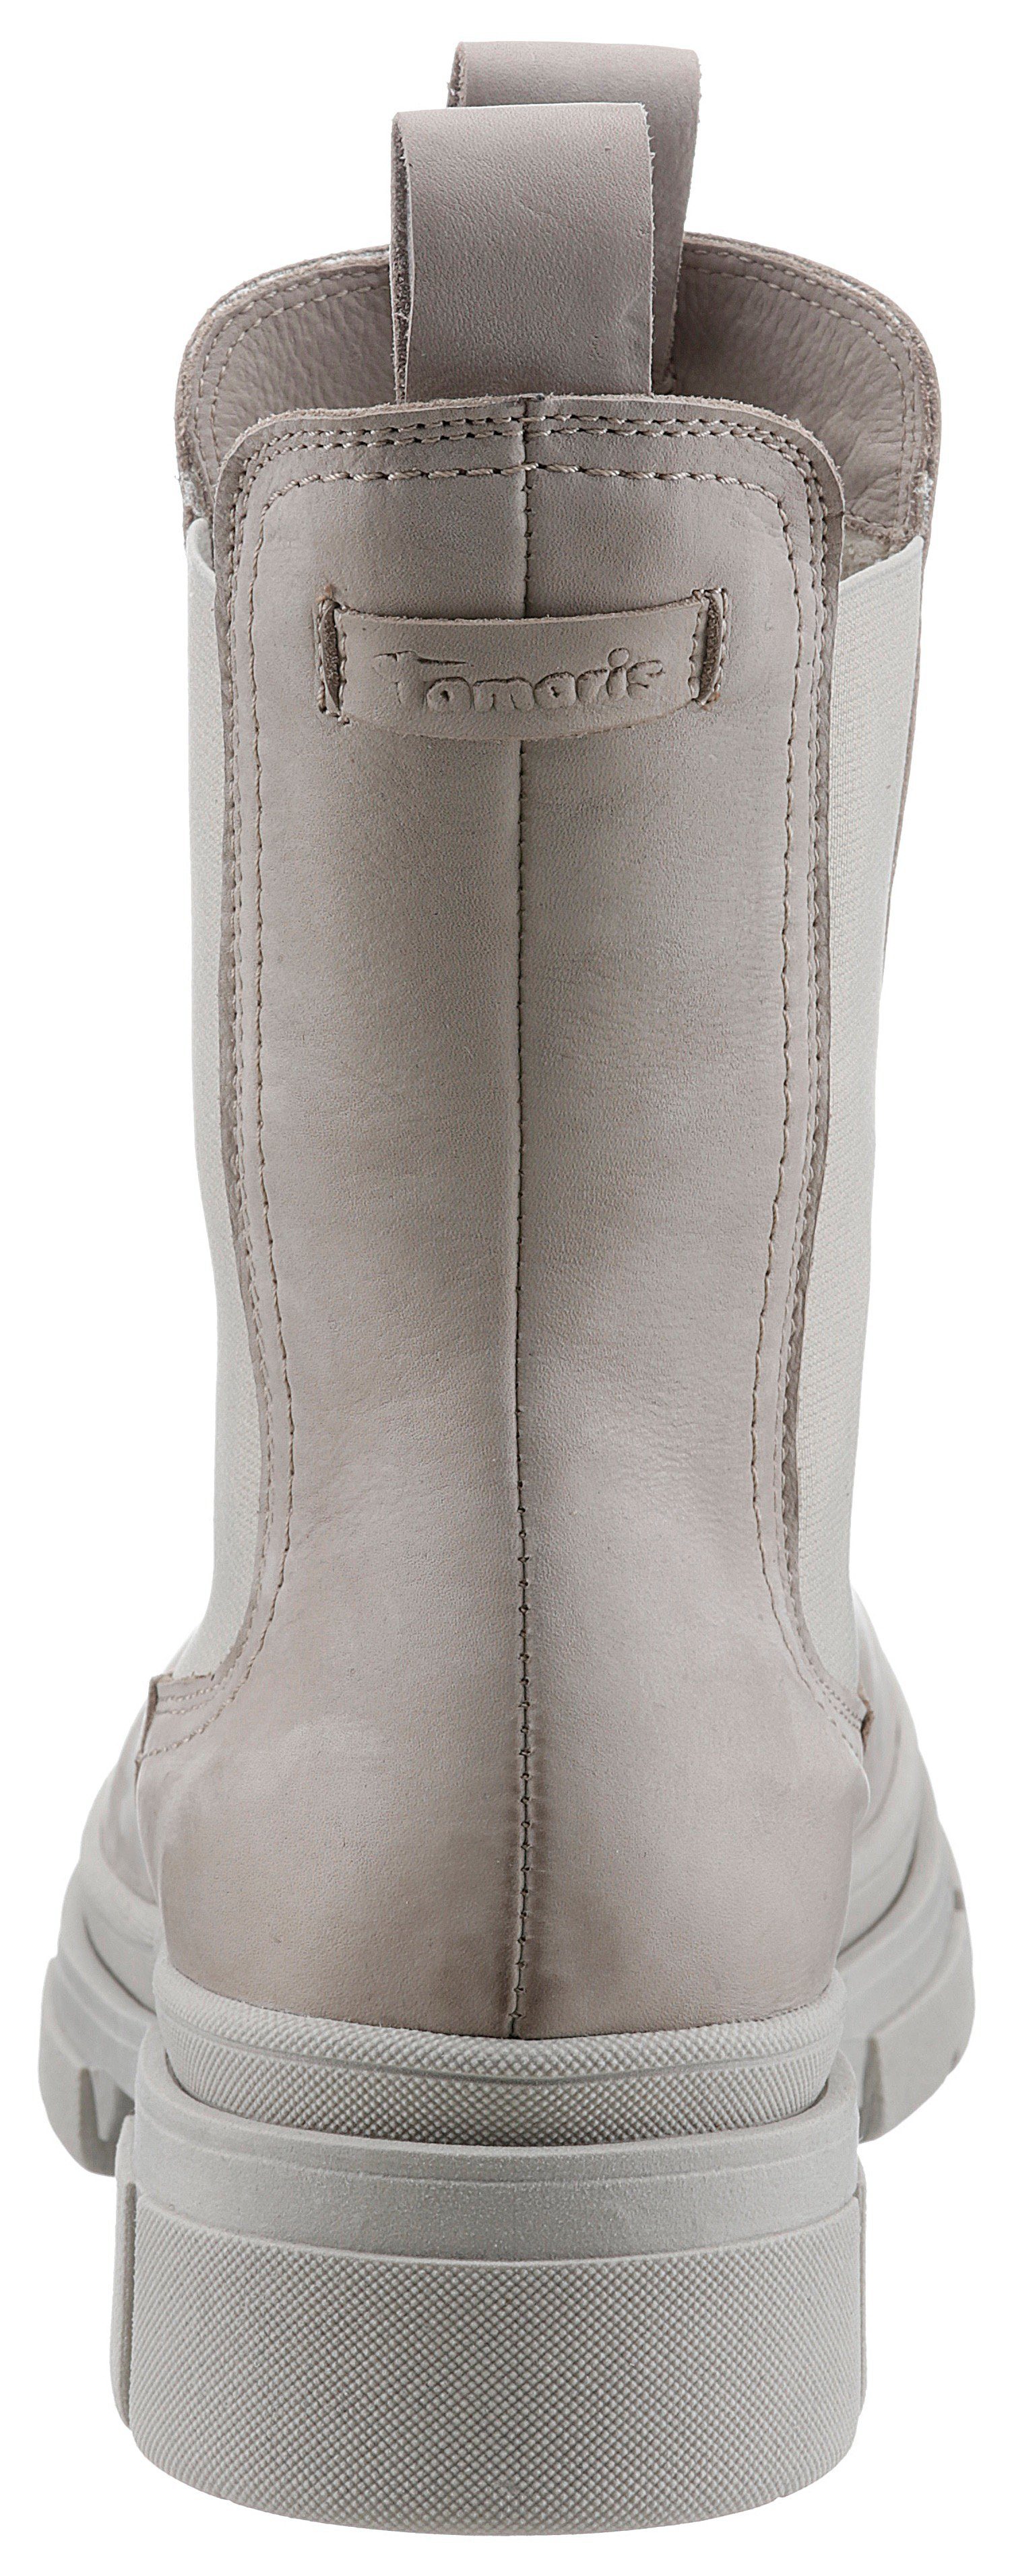 Tamaris in bequemer taupe Chelseaboots Form